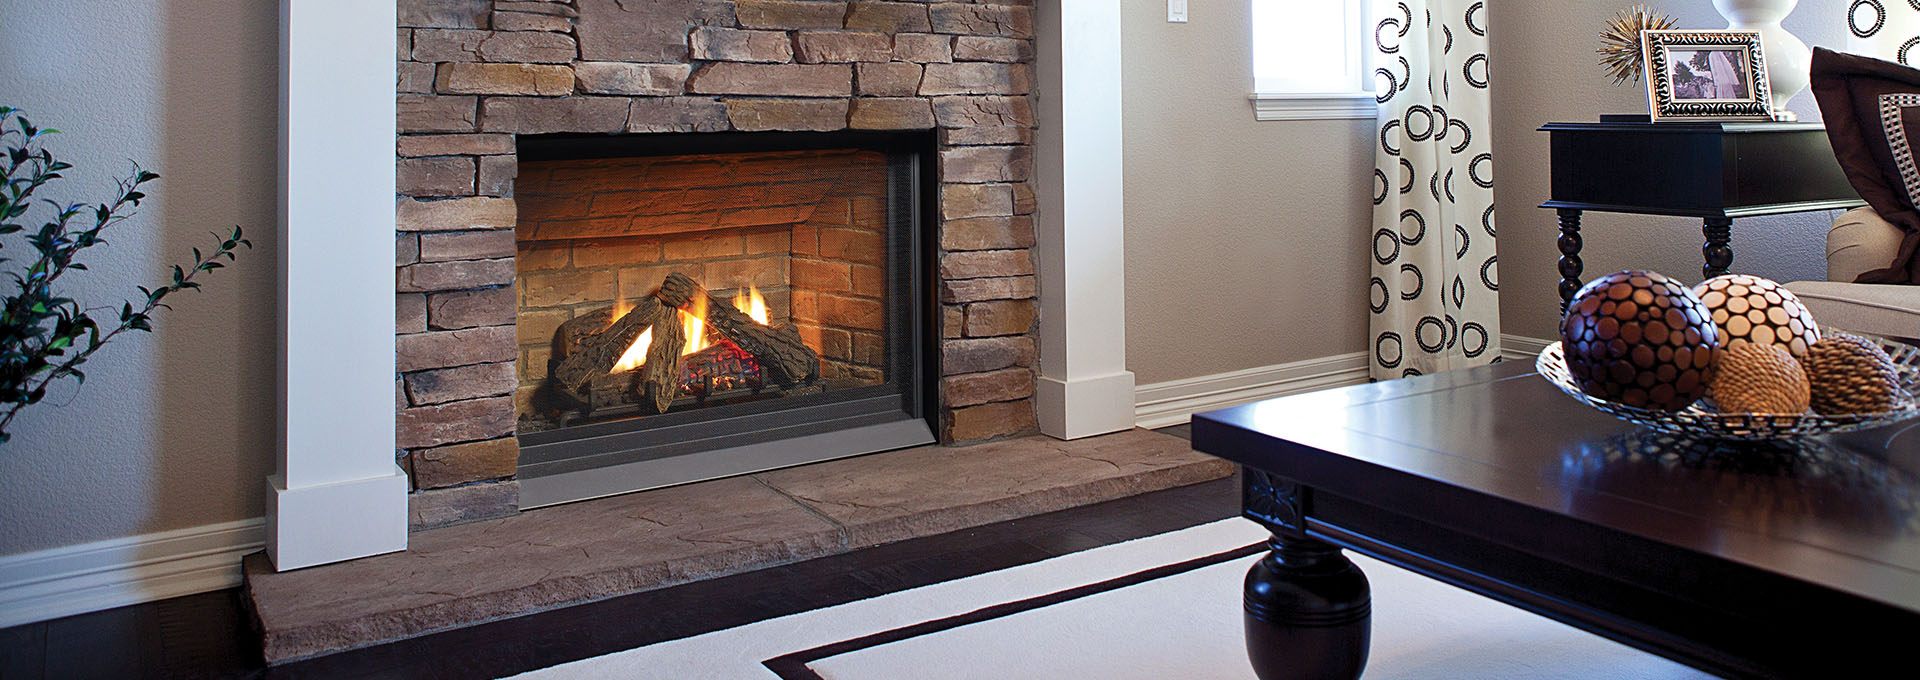 Mendota Gas Fireplace Insert Reviews New Can Gas Fireplace Heat A Room How to Heat Your House Using